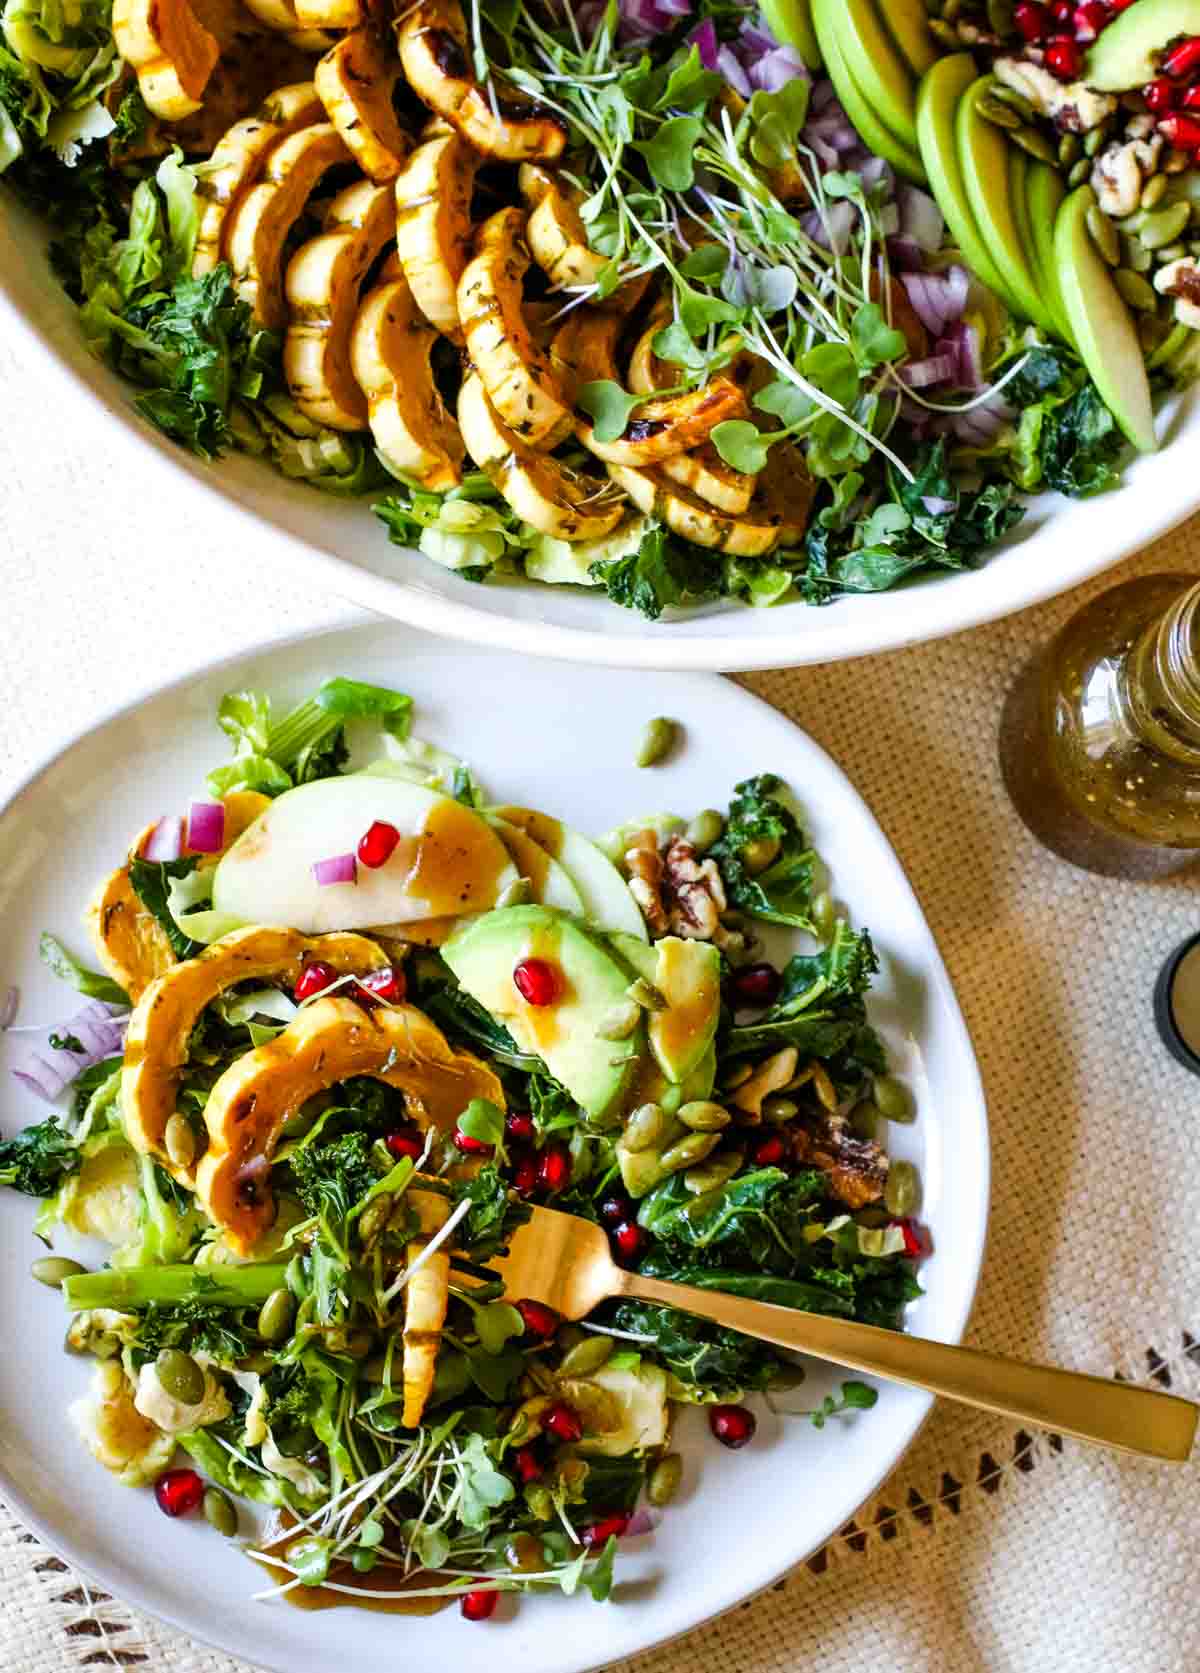 kale salad with delicata squash on a white plate with bowl of salad to the side.